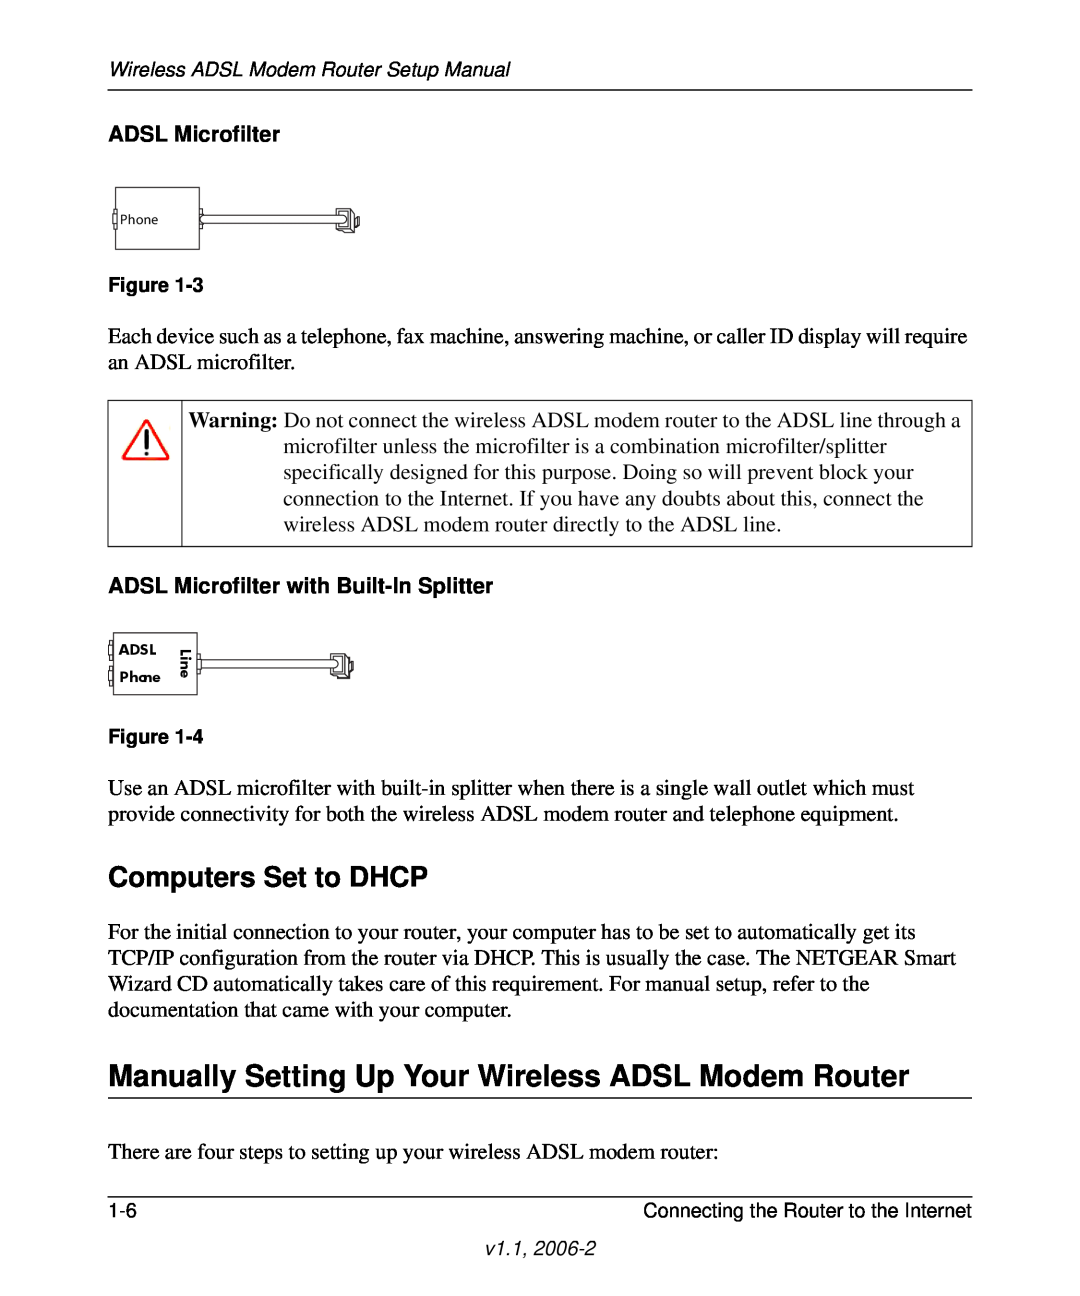 NETGEAR manual Manually Setting Up Your Wireless ADSL Modem Router, Computers Set to DHCP, ADSL Microfilter 